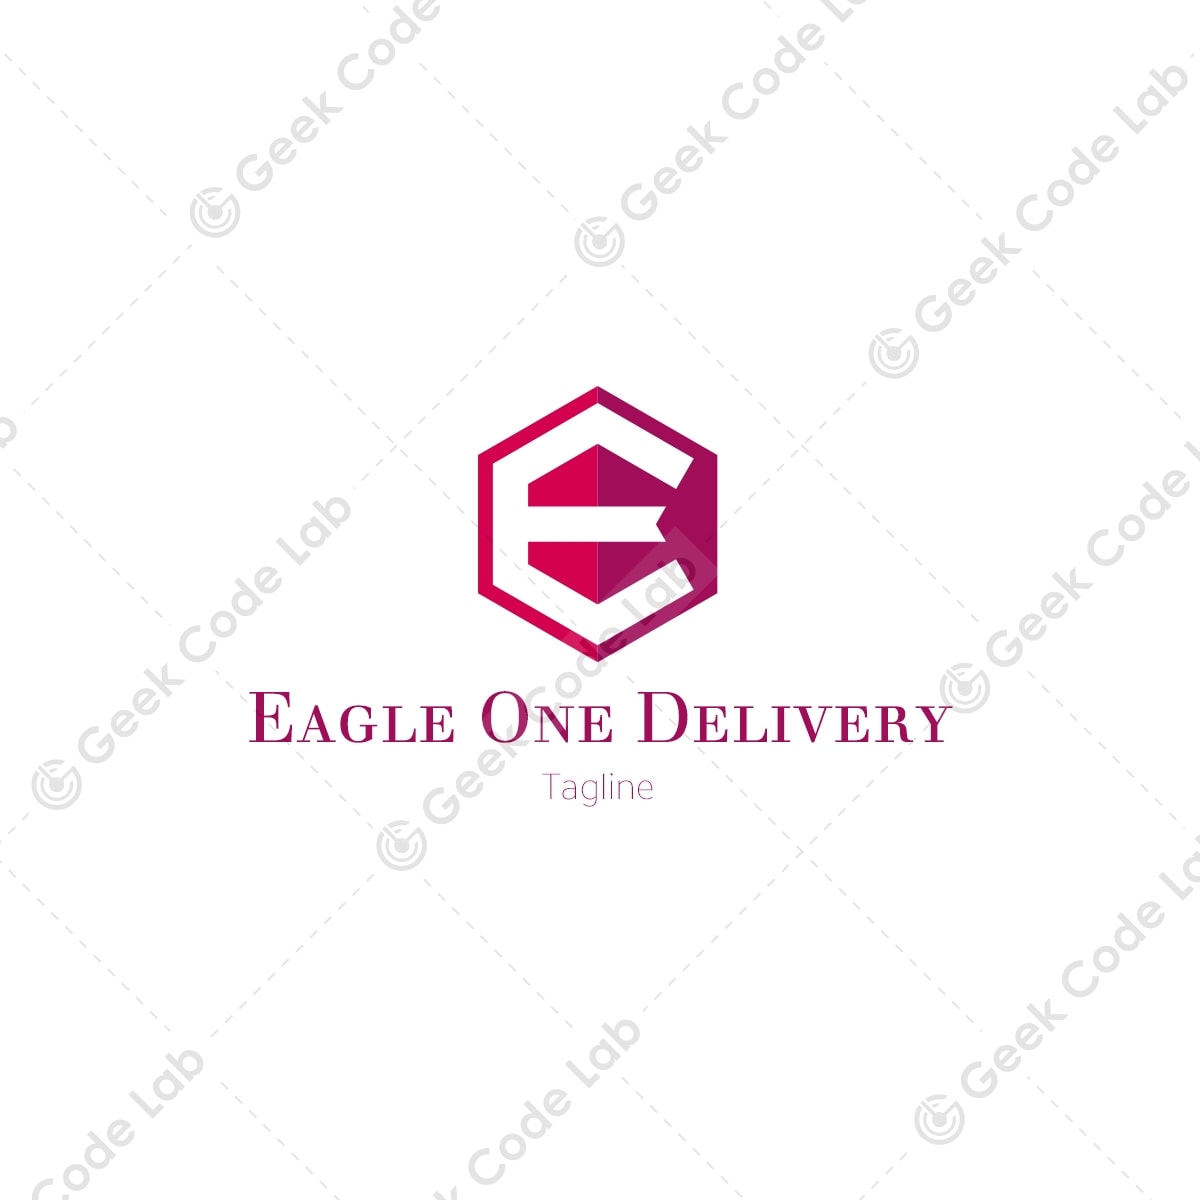 Eagle One Delivery